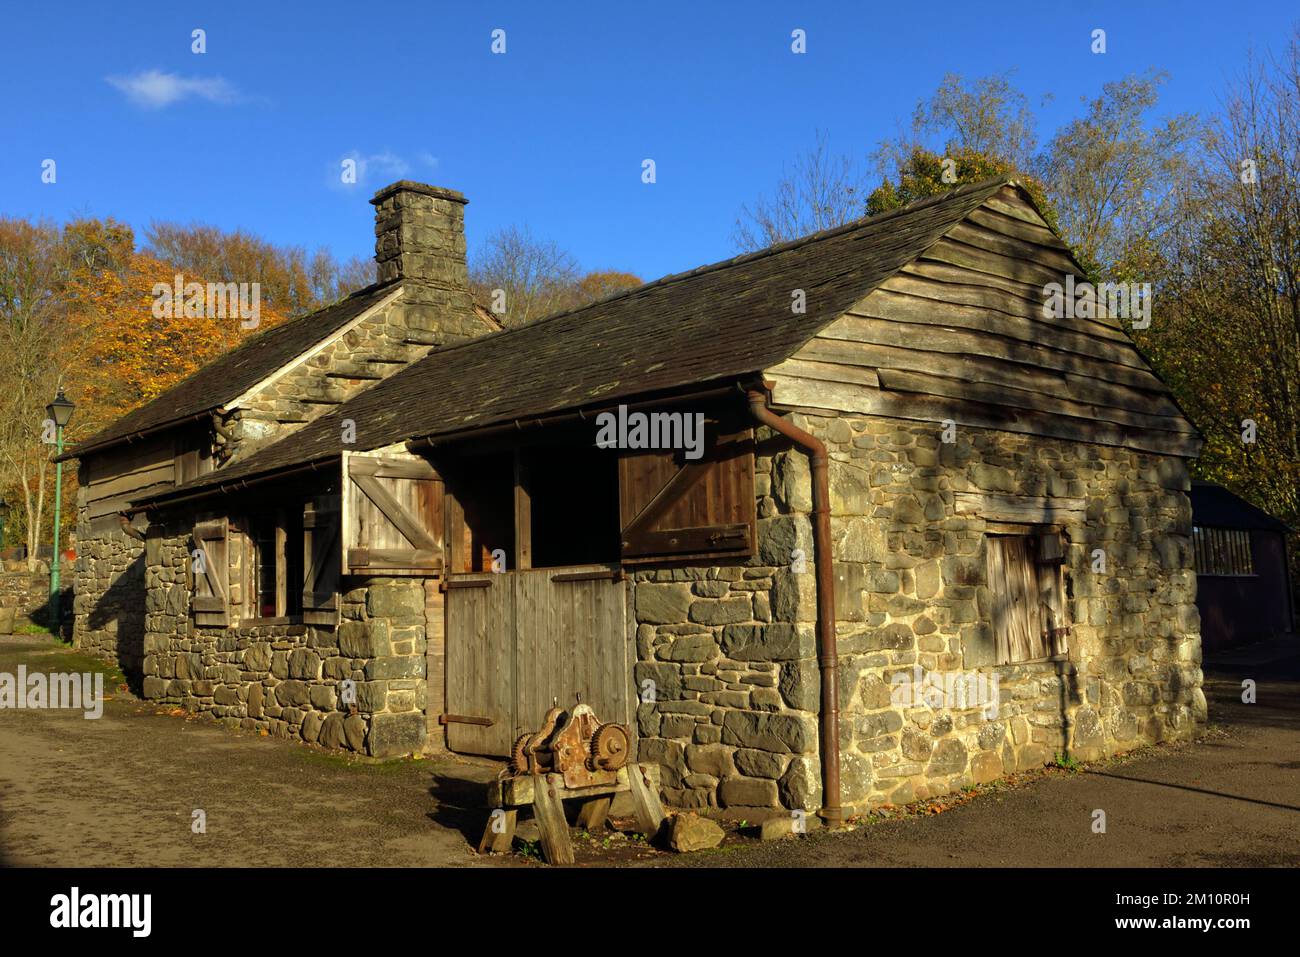 The Smithy, St Fagans National Museum of History/Amgueddfa Werin Cymru, Cardiff, Galles du Sud, Royaume-Uni. Banque D'Images